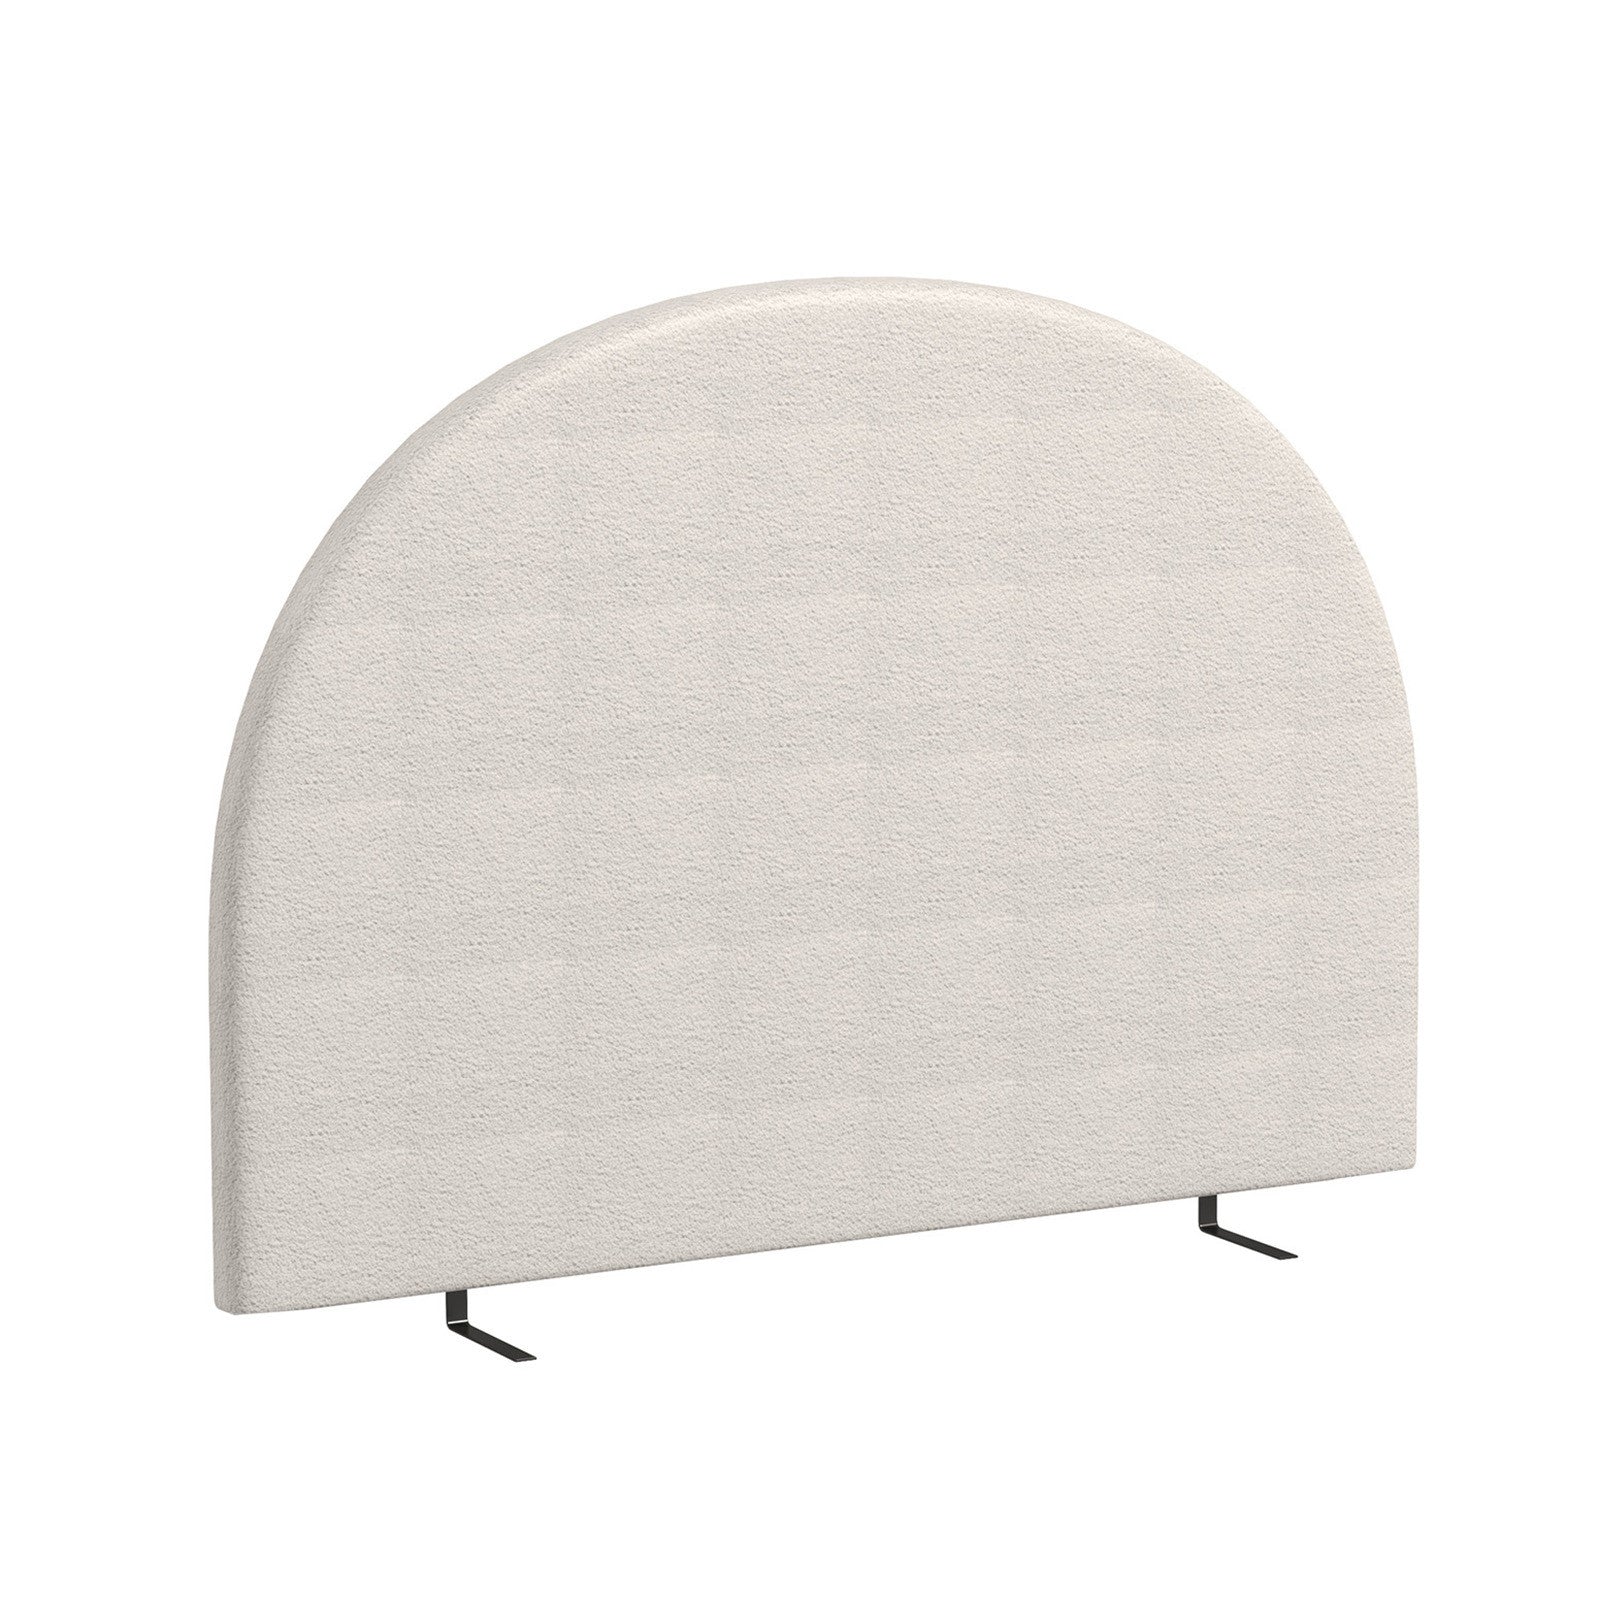 Milano Decor Ariana Curved Boucle Bedhead Headboard Upholstered Cushioned White - Queen - White